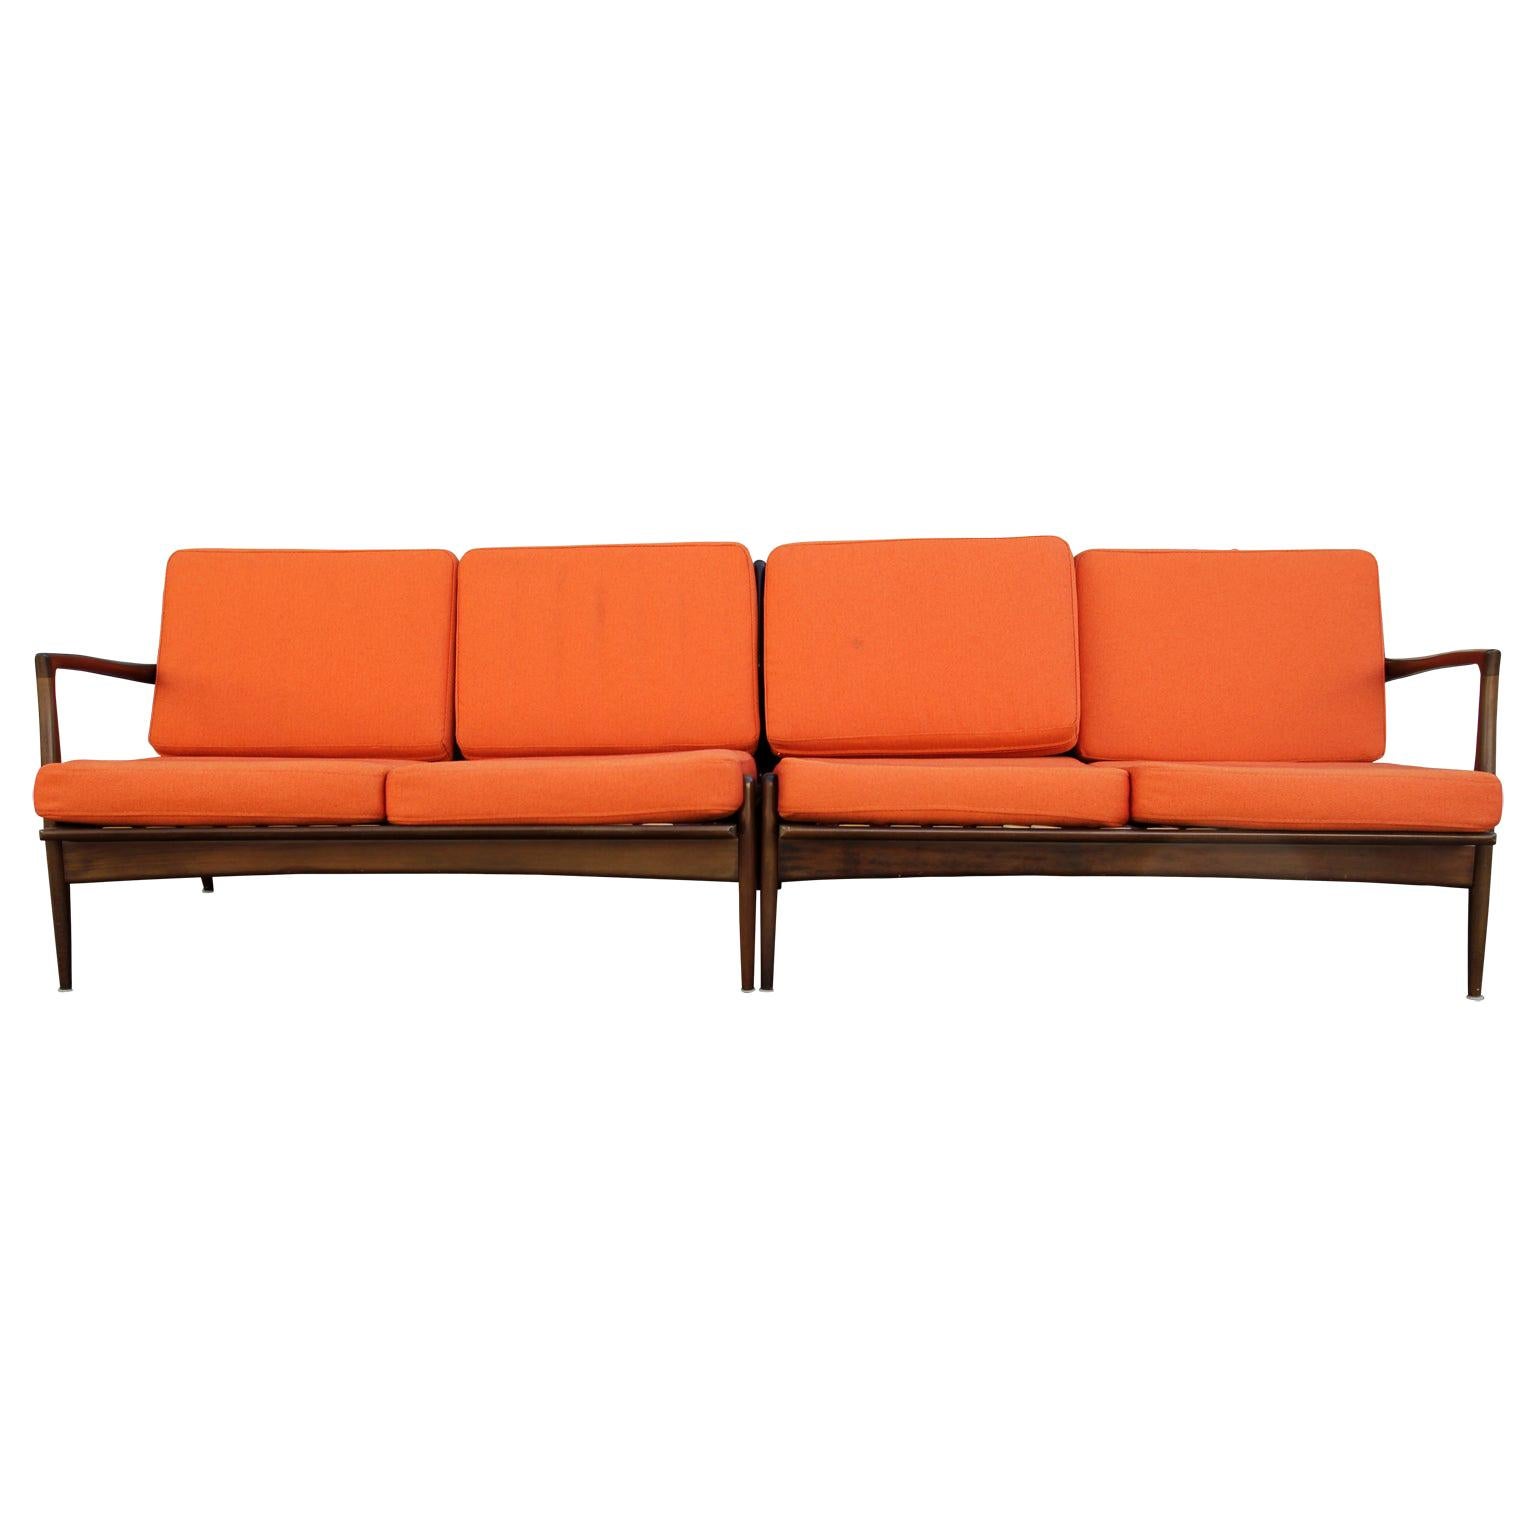 Modern Danish style orange sectional sofa
- Orange sectional sofa with a teak frame
- Modern Danish style design in the style of Kofod Larsen
- Minimal light weight design perfect for upper level spaces
- Comfortable design.